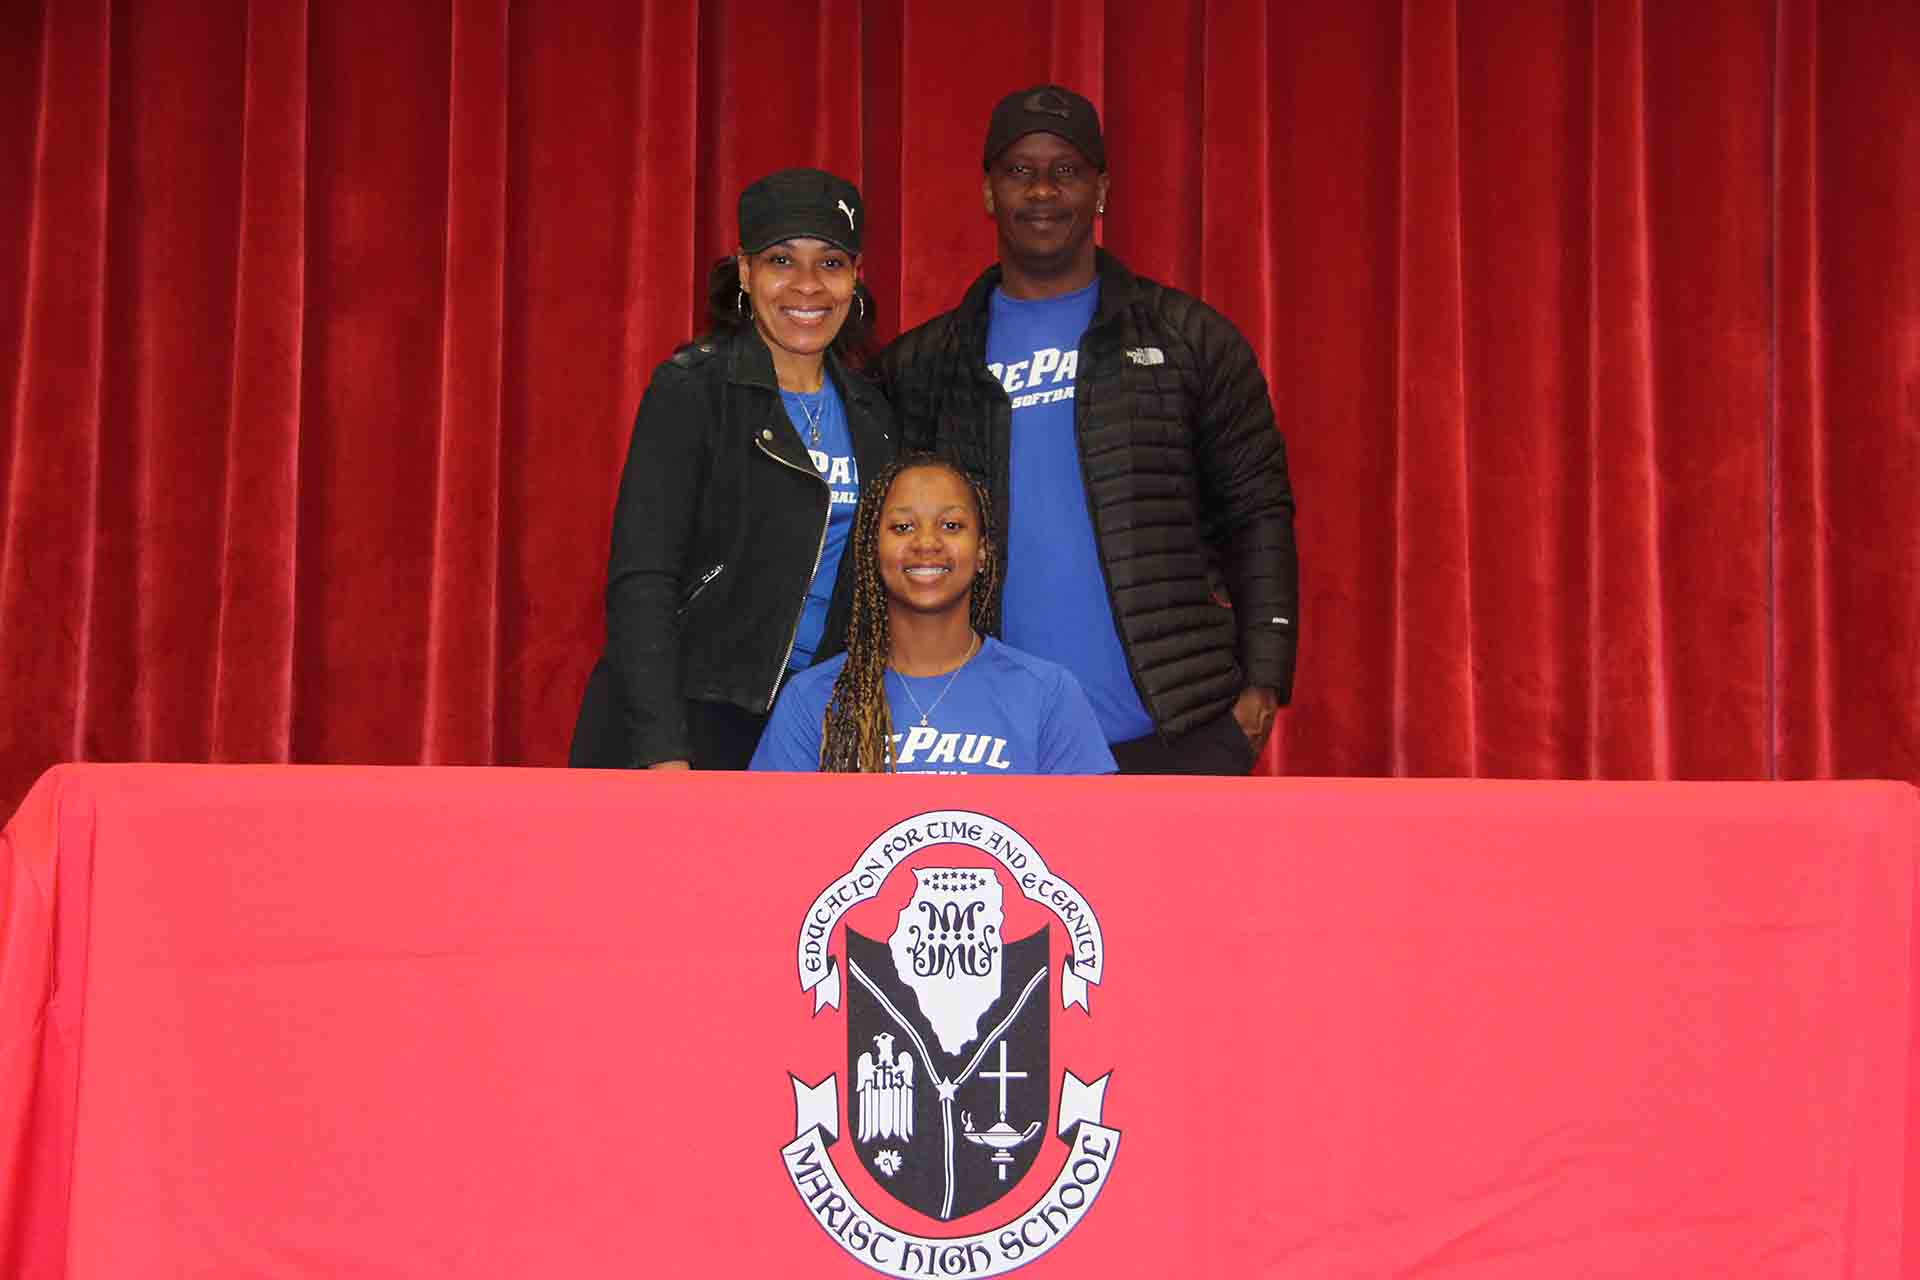 marist-student-and-family-sign-to-depaul-university